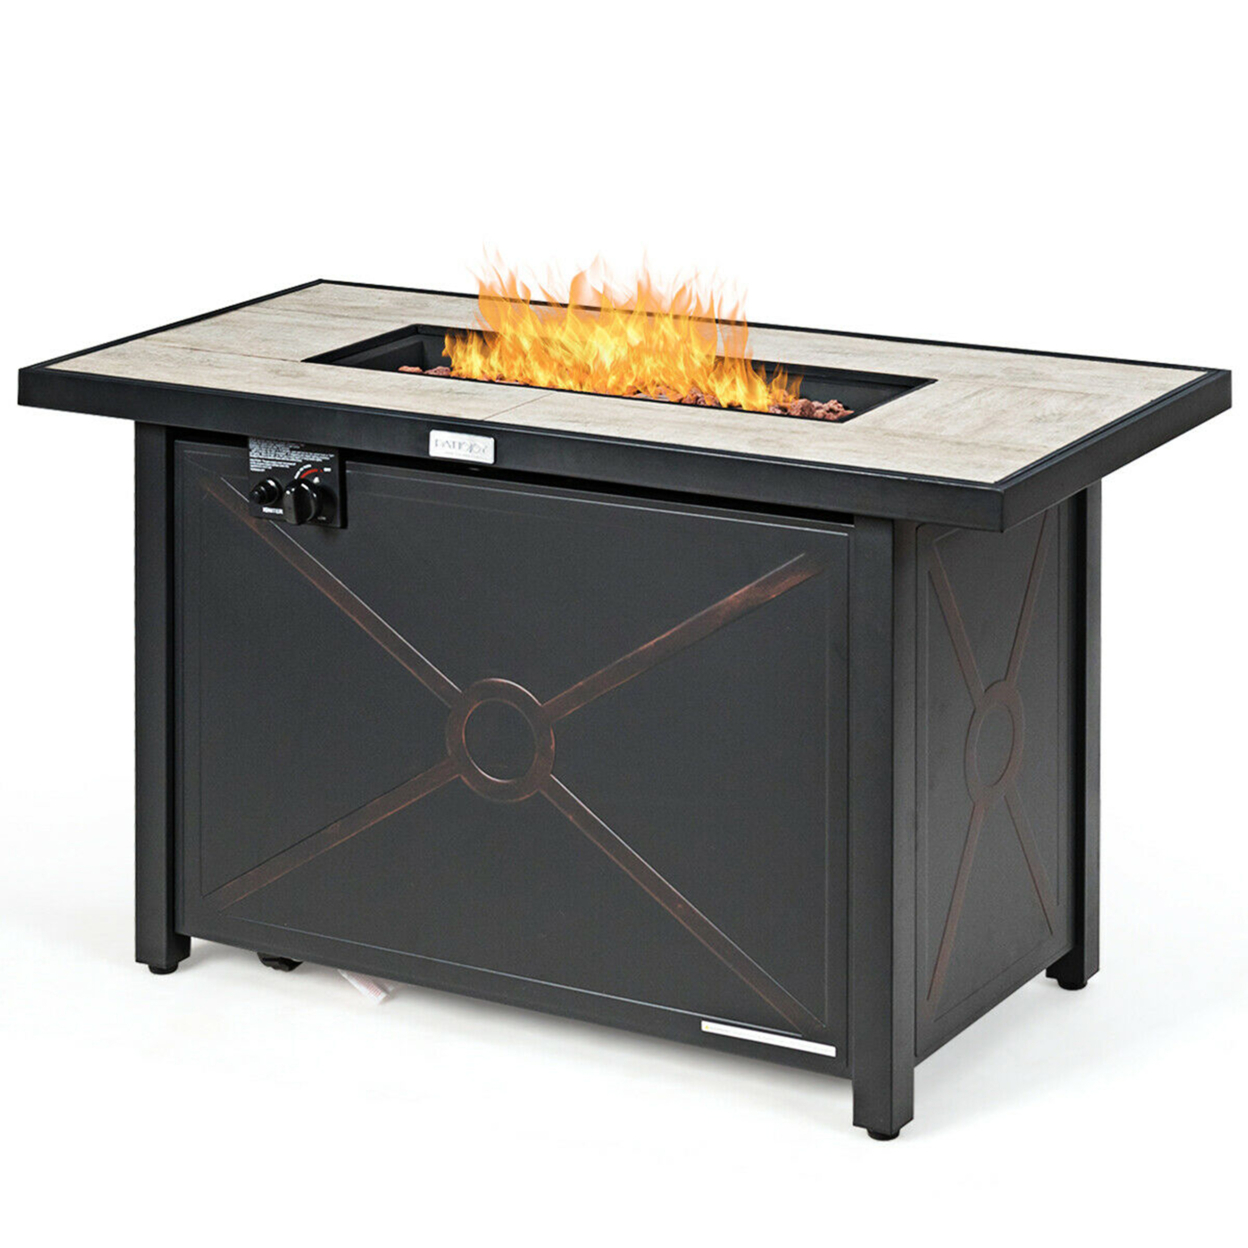 Gymax 42'' Rectangular Propane Gas Fire Pit 60,000 Btu Heater Outdoor Table W/ Cover